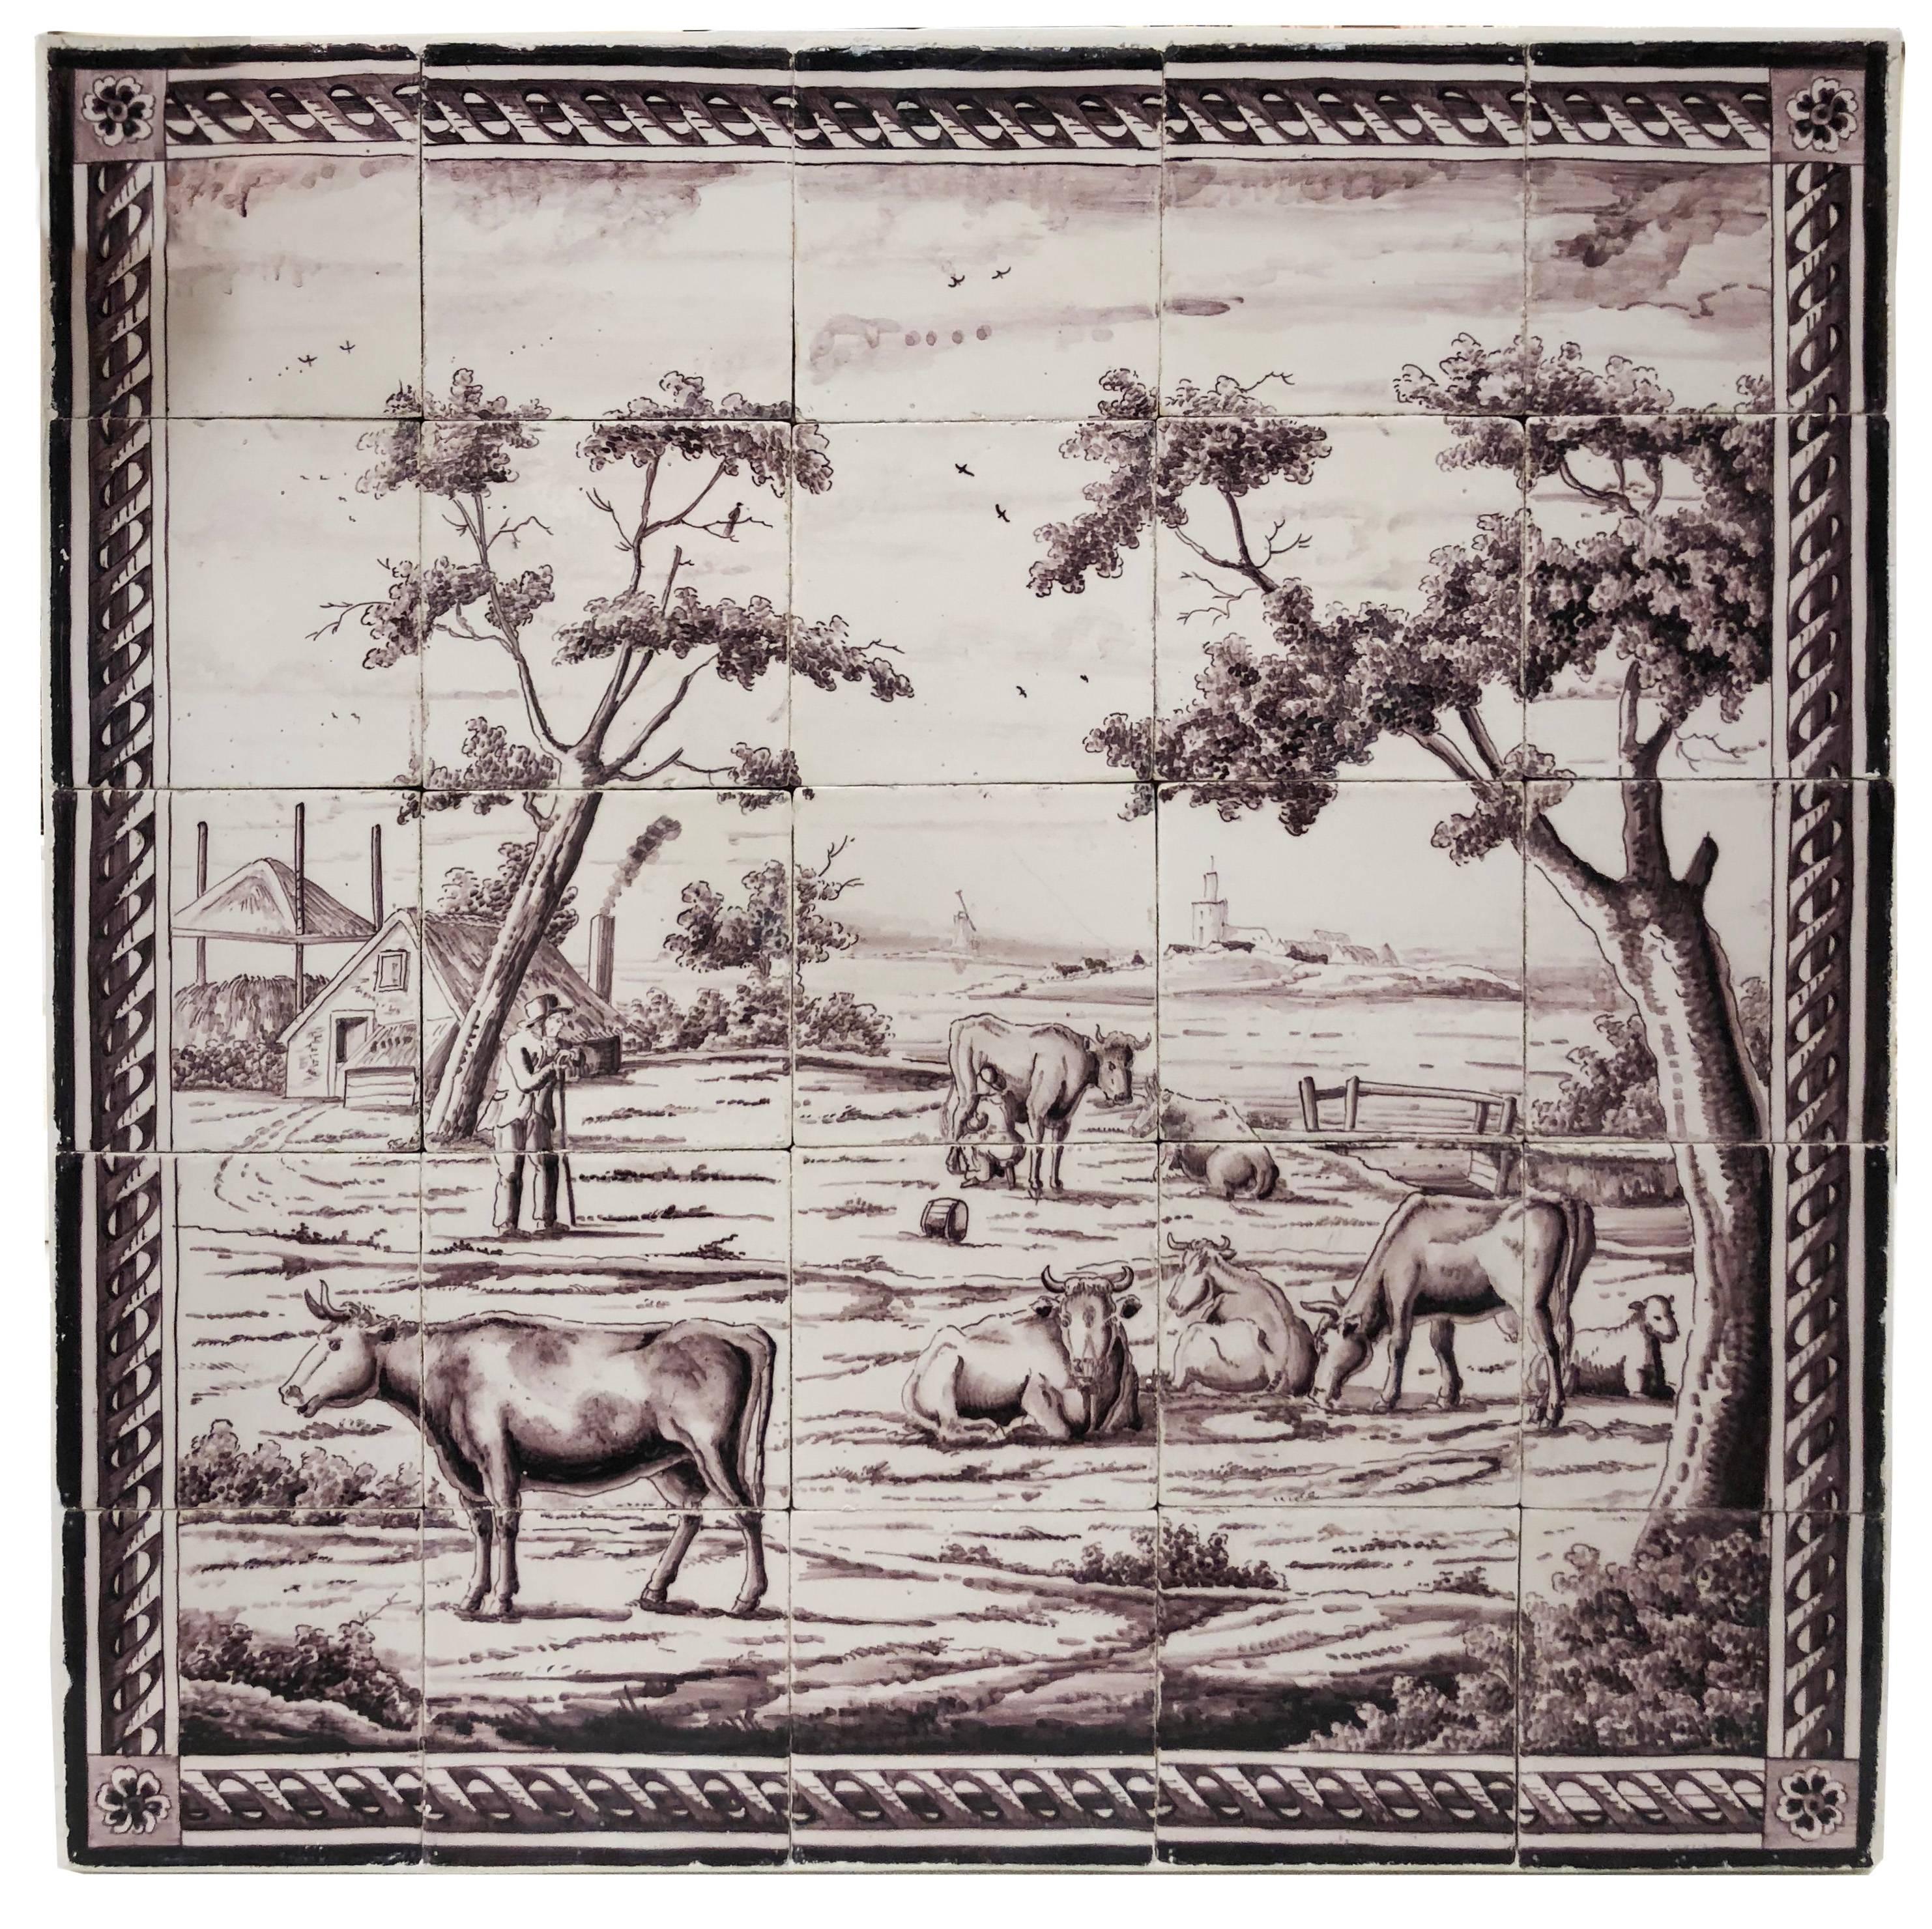 A very attractive grouping of 18th century blue and manganese tiles forming various scenes as well as several runs of decorative tile which may have formed the surrounds of chimney fire boxes. The largest piece represents a bucolic farm scene with